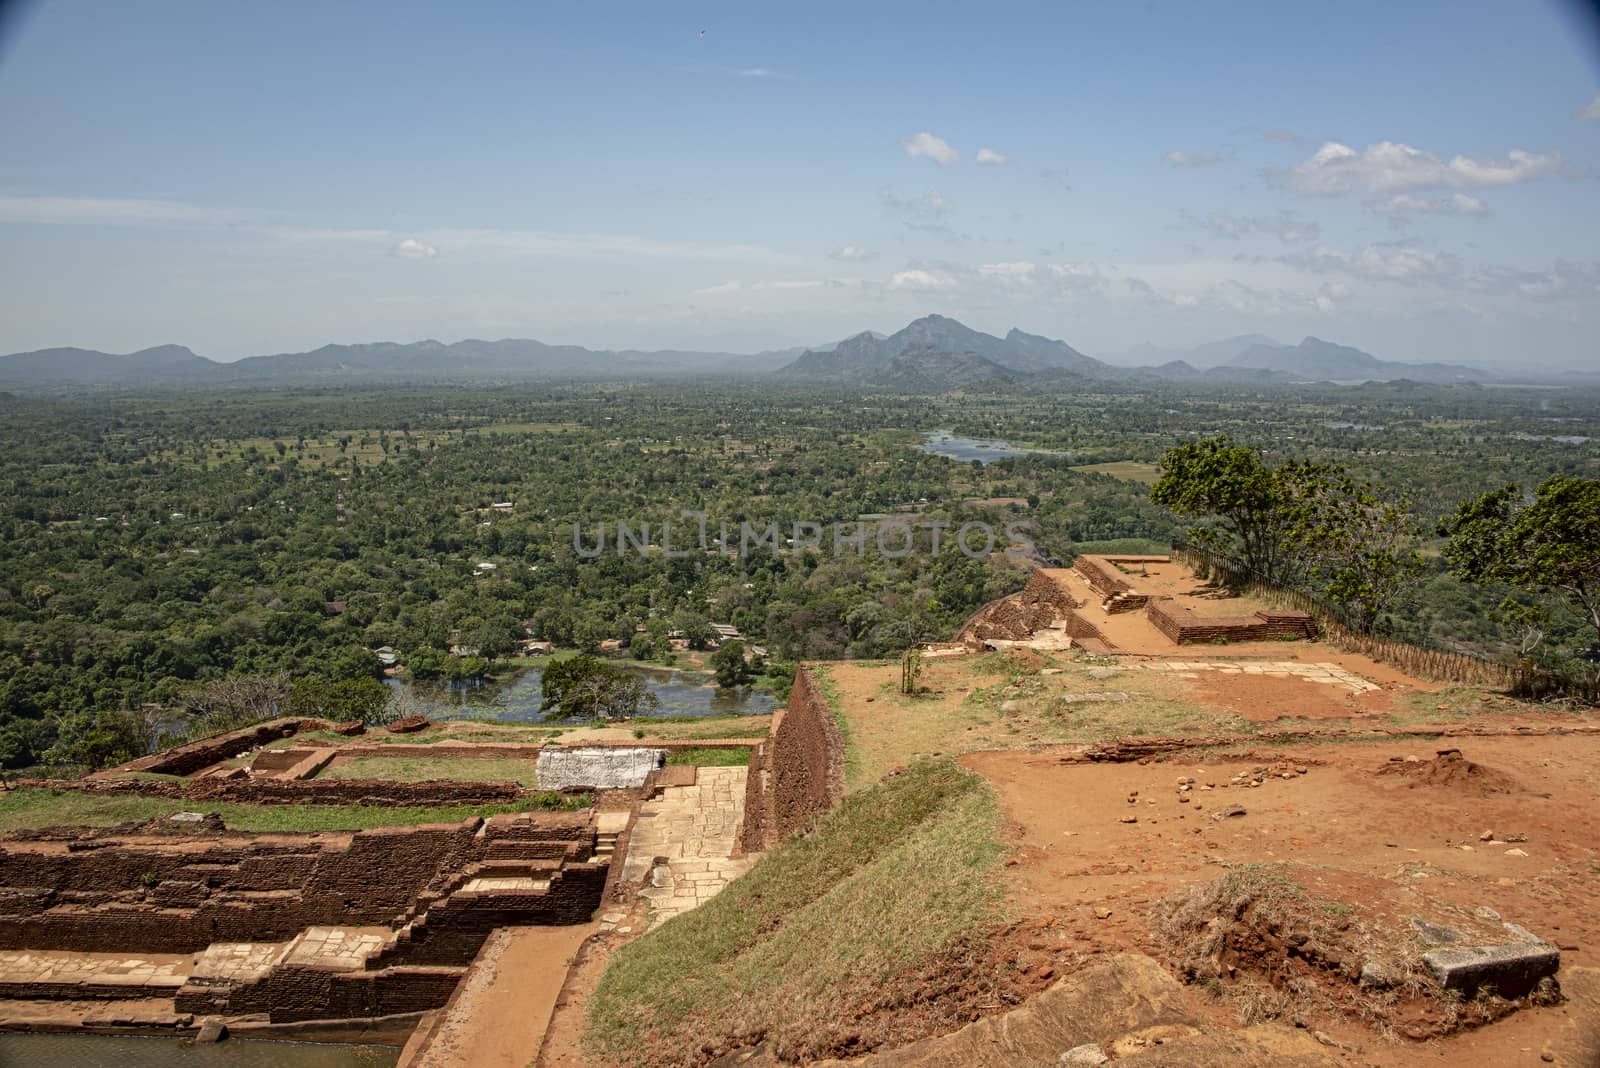 Sri lanka, Sigyriya - Sept 2015: vista of  mountains, lakes and jungle  from the top if the Lion Rock